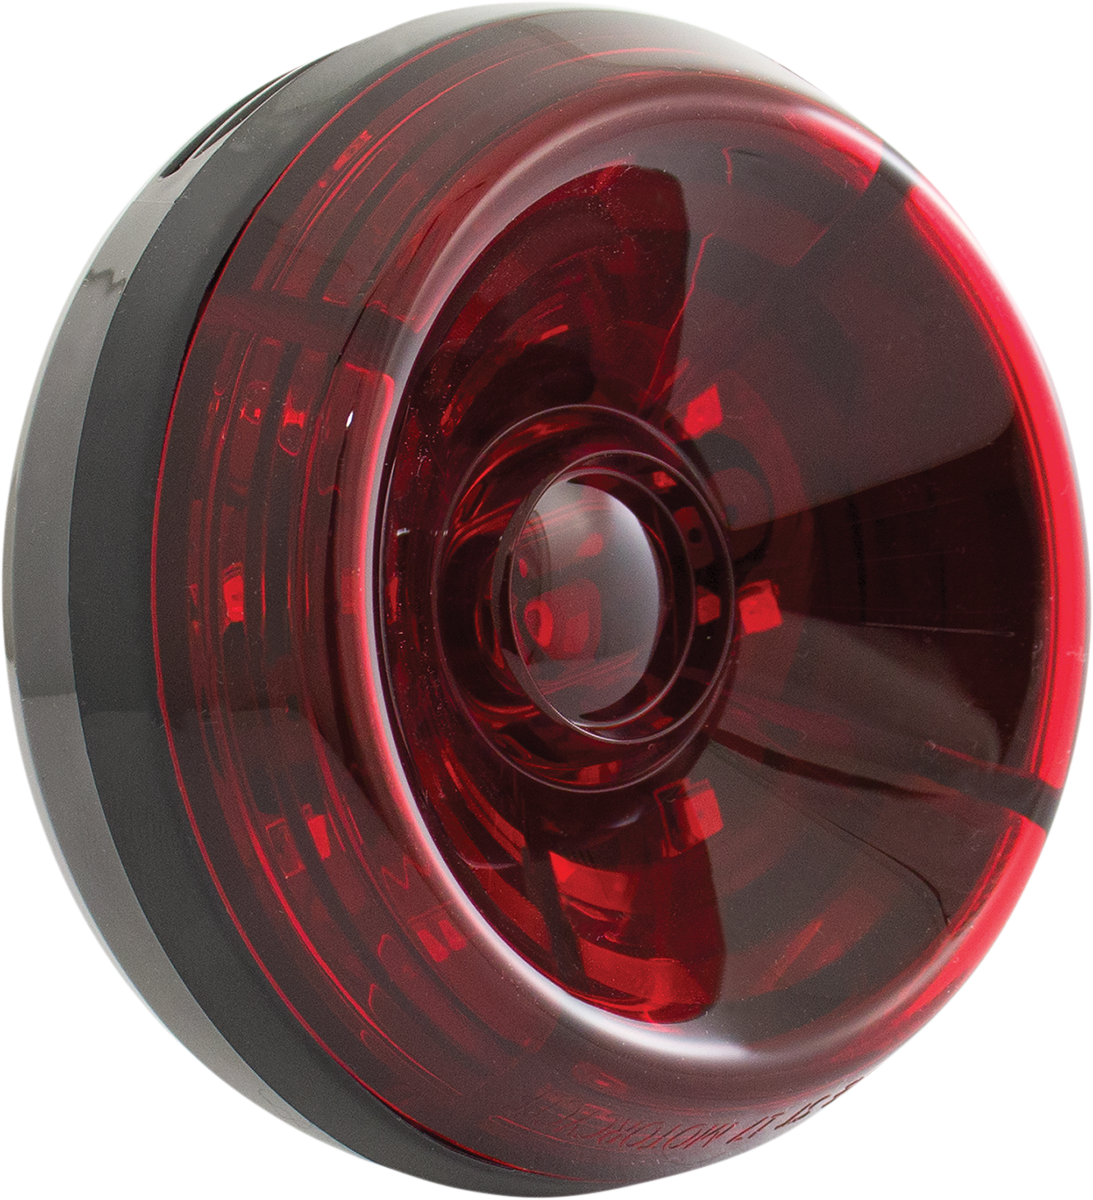 KOSO NORTH AMERICA LED Taillight - Red Lens HB035020